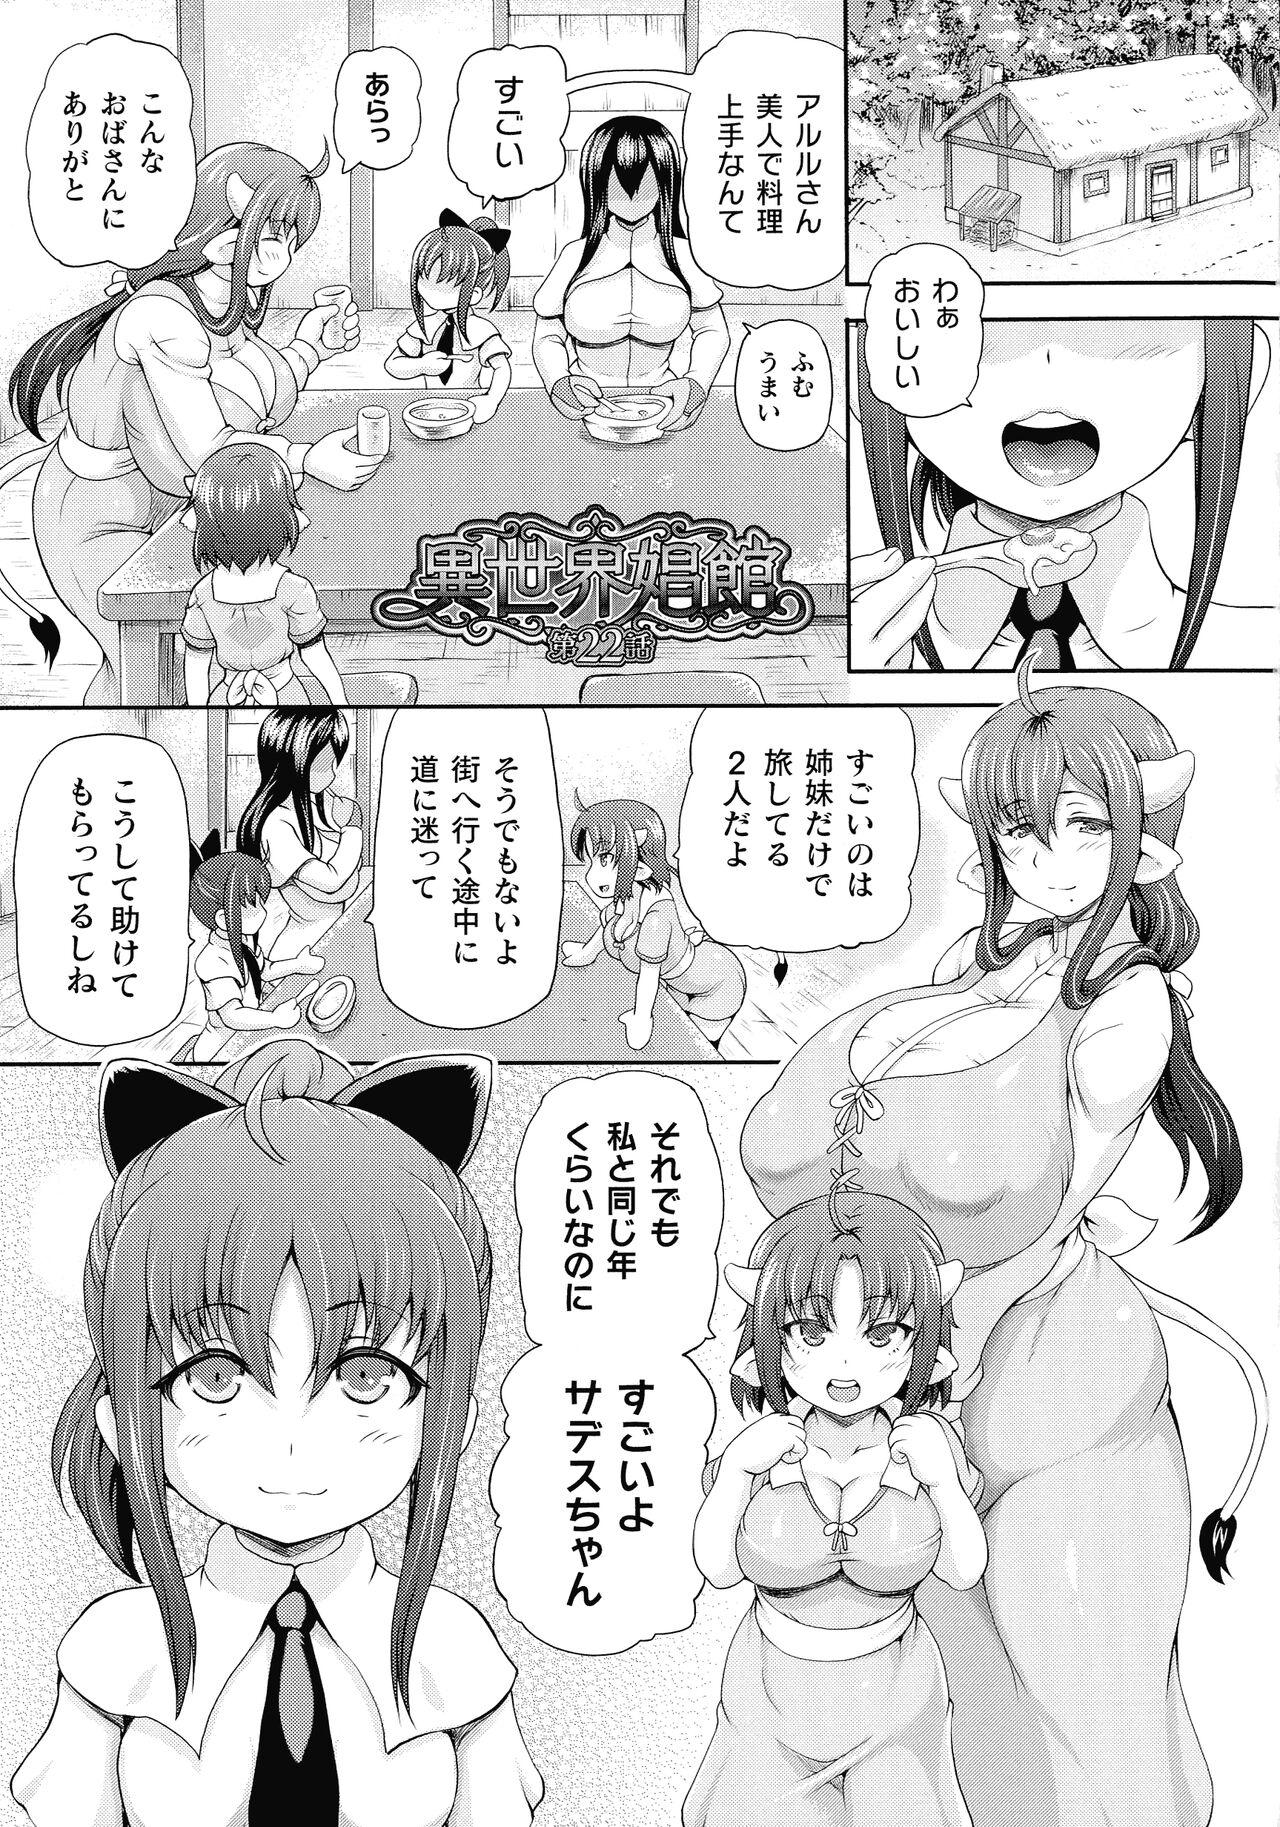 Isekai Shoukan 3 - Brothel in Another World 138